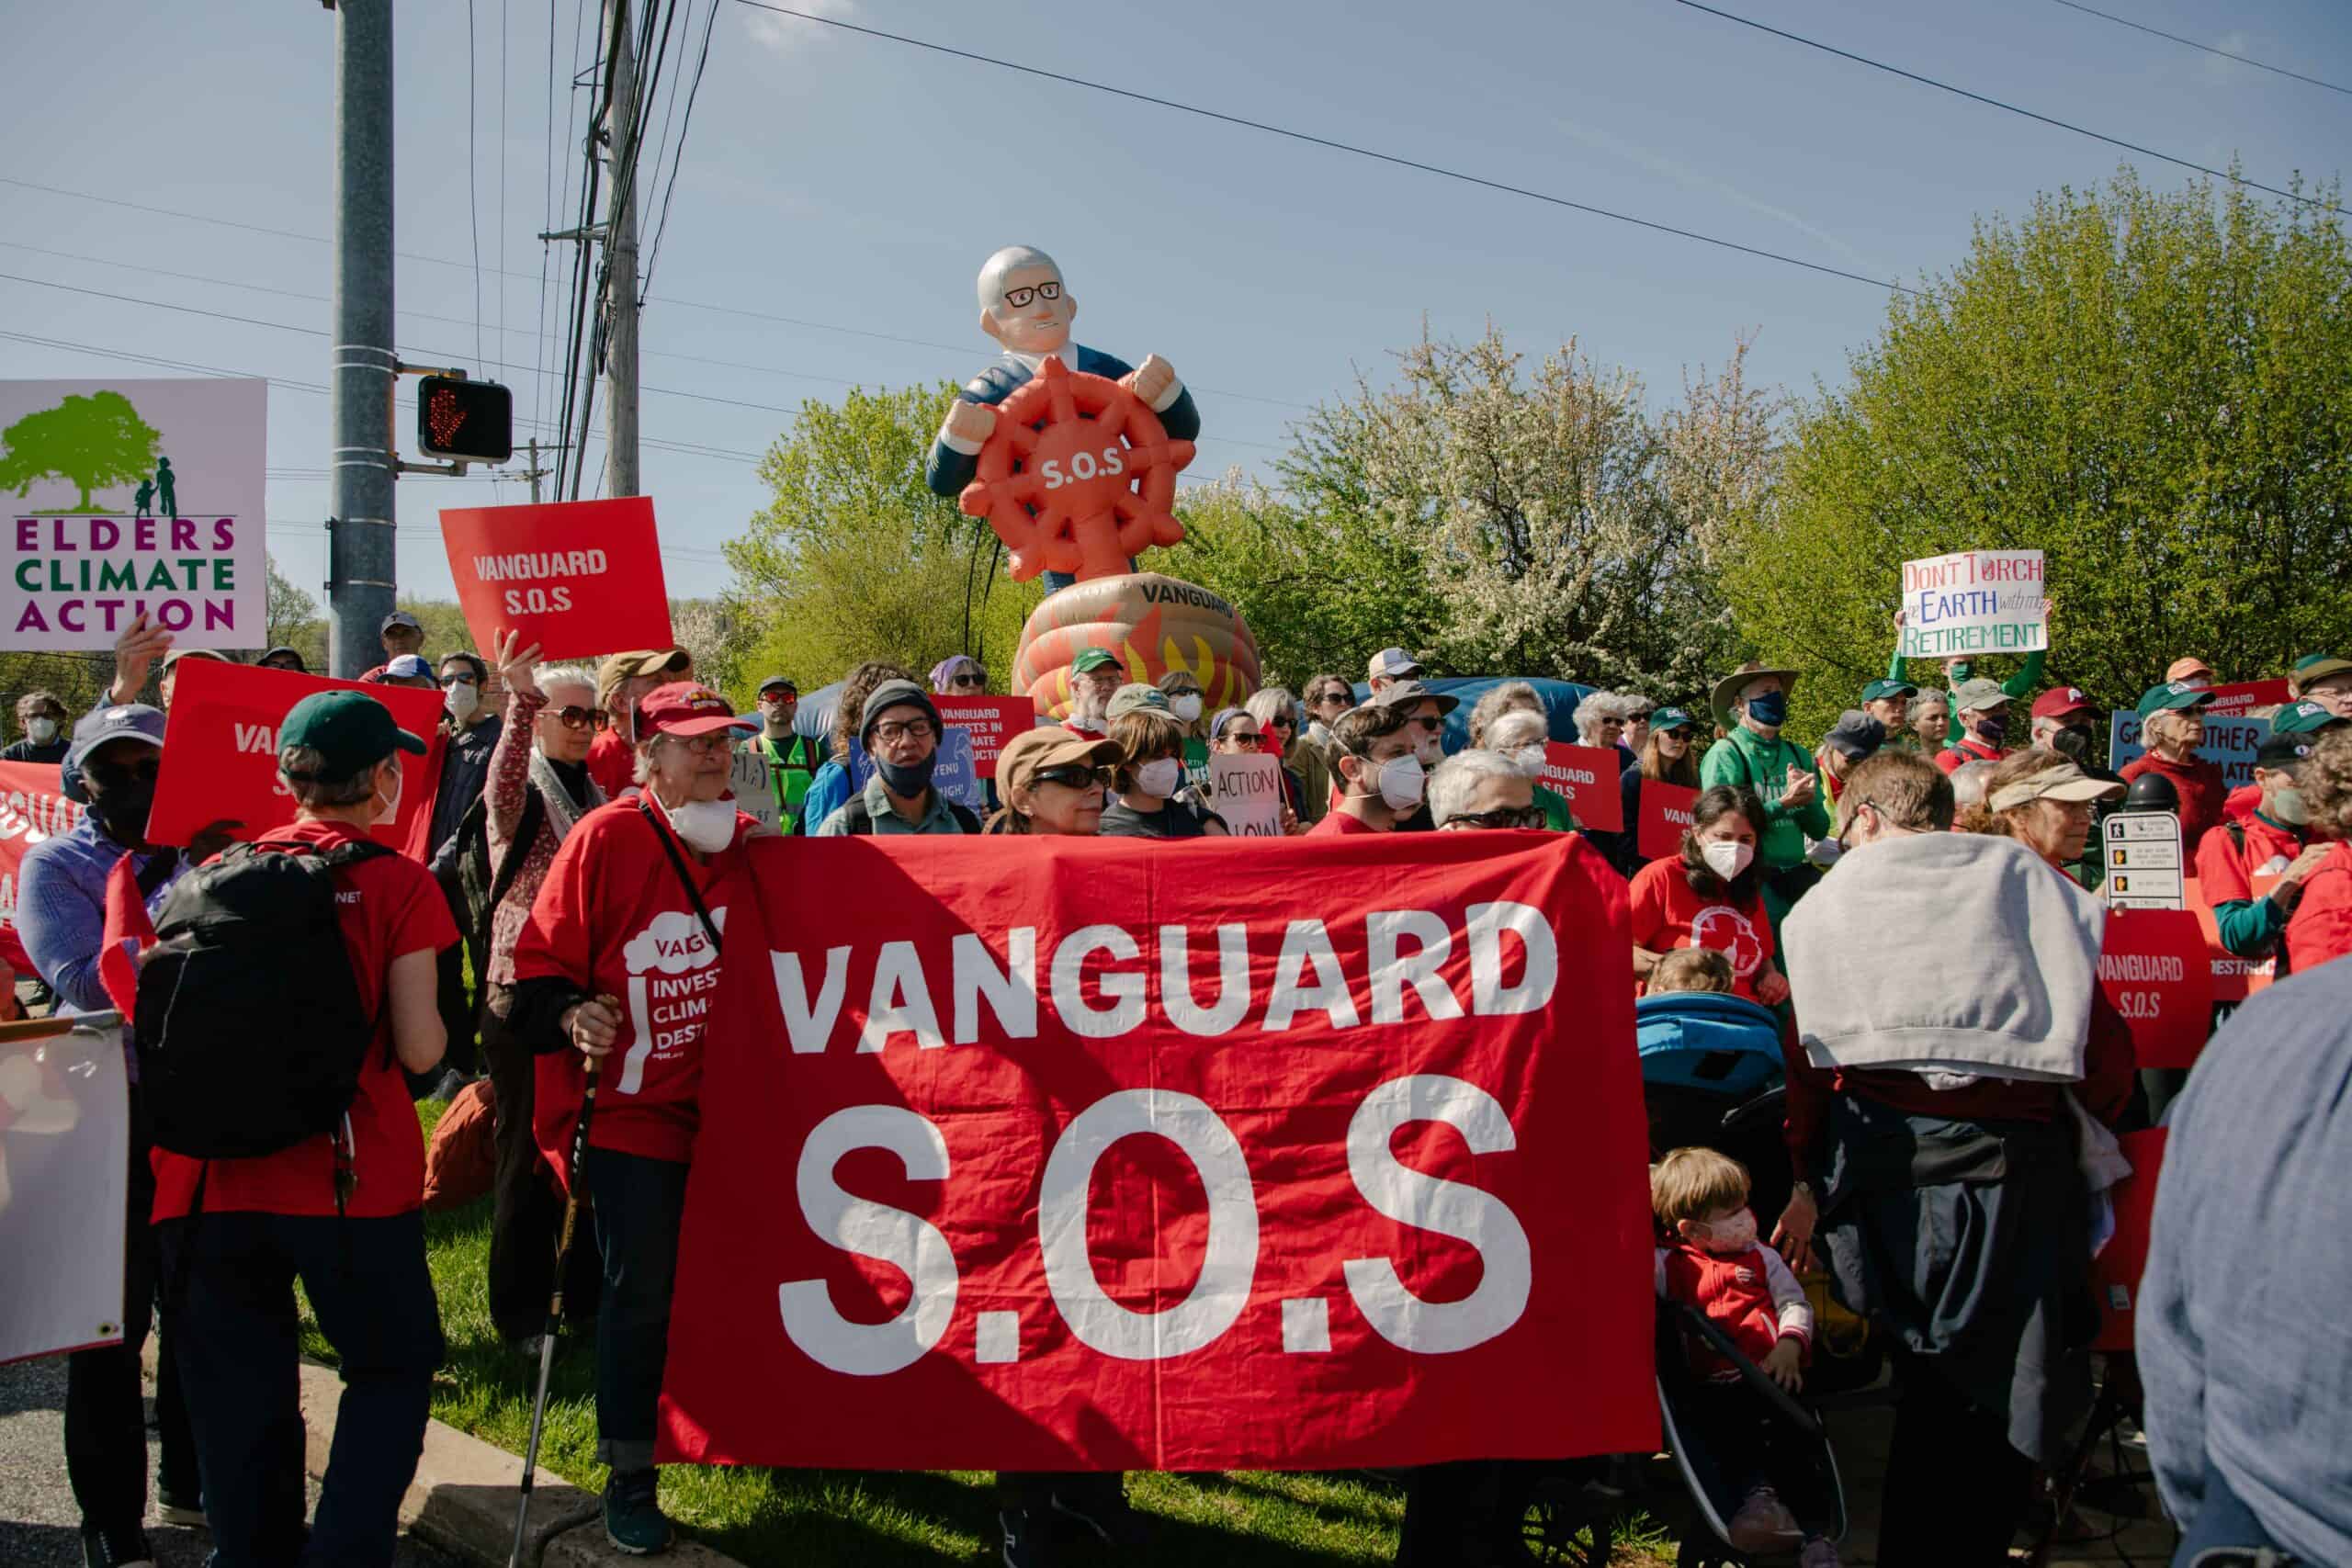 A large crowd of people outside with green trees in the background with a red banner being held saying "Vanguard S.O.S"